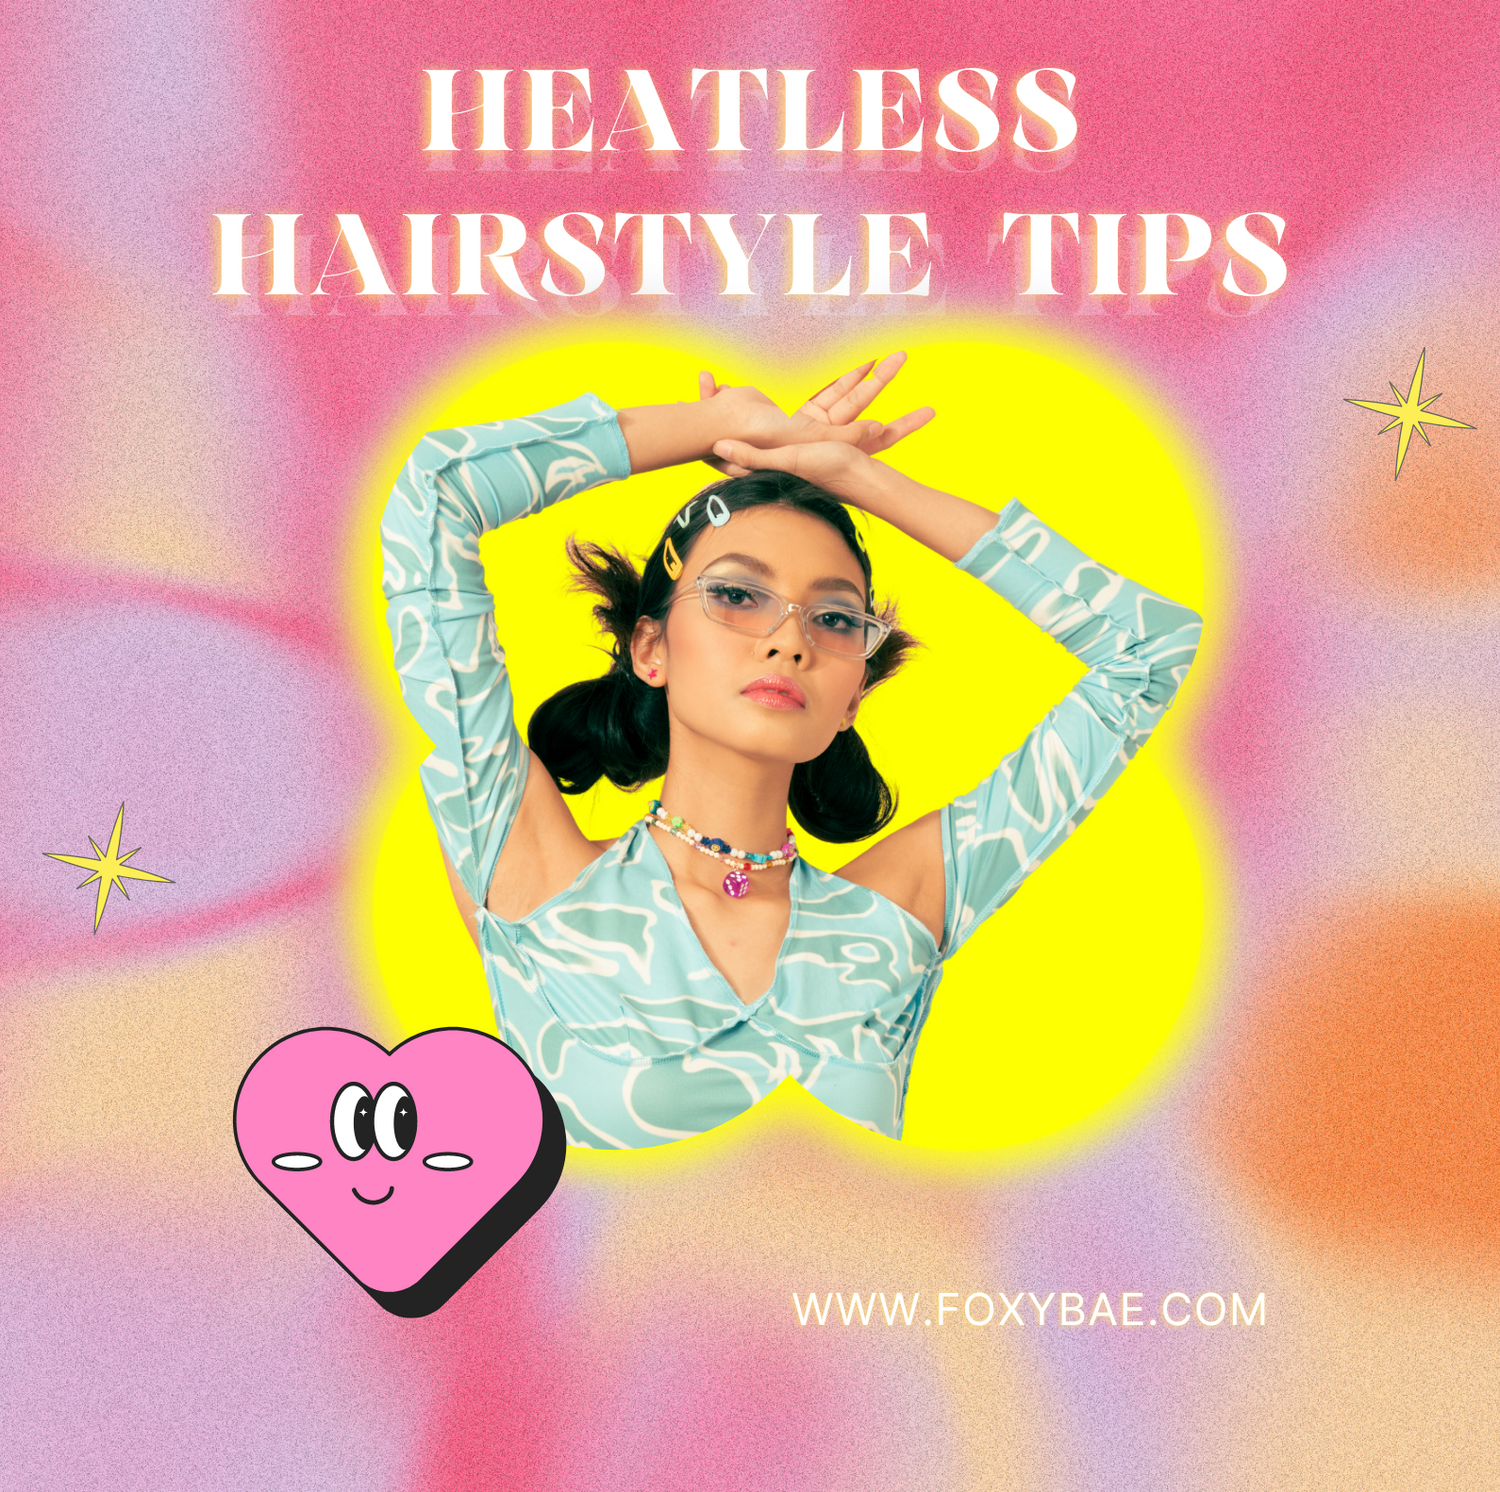 Top Tips for Heatless Hairstyles — From Products to Looks! featured image